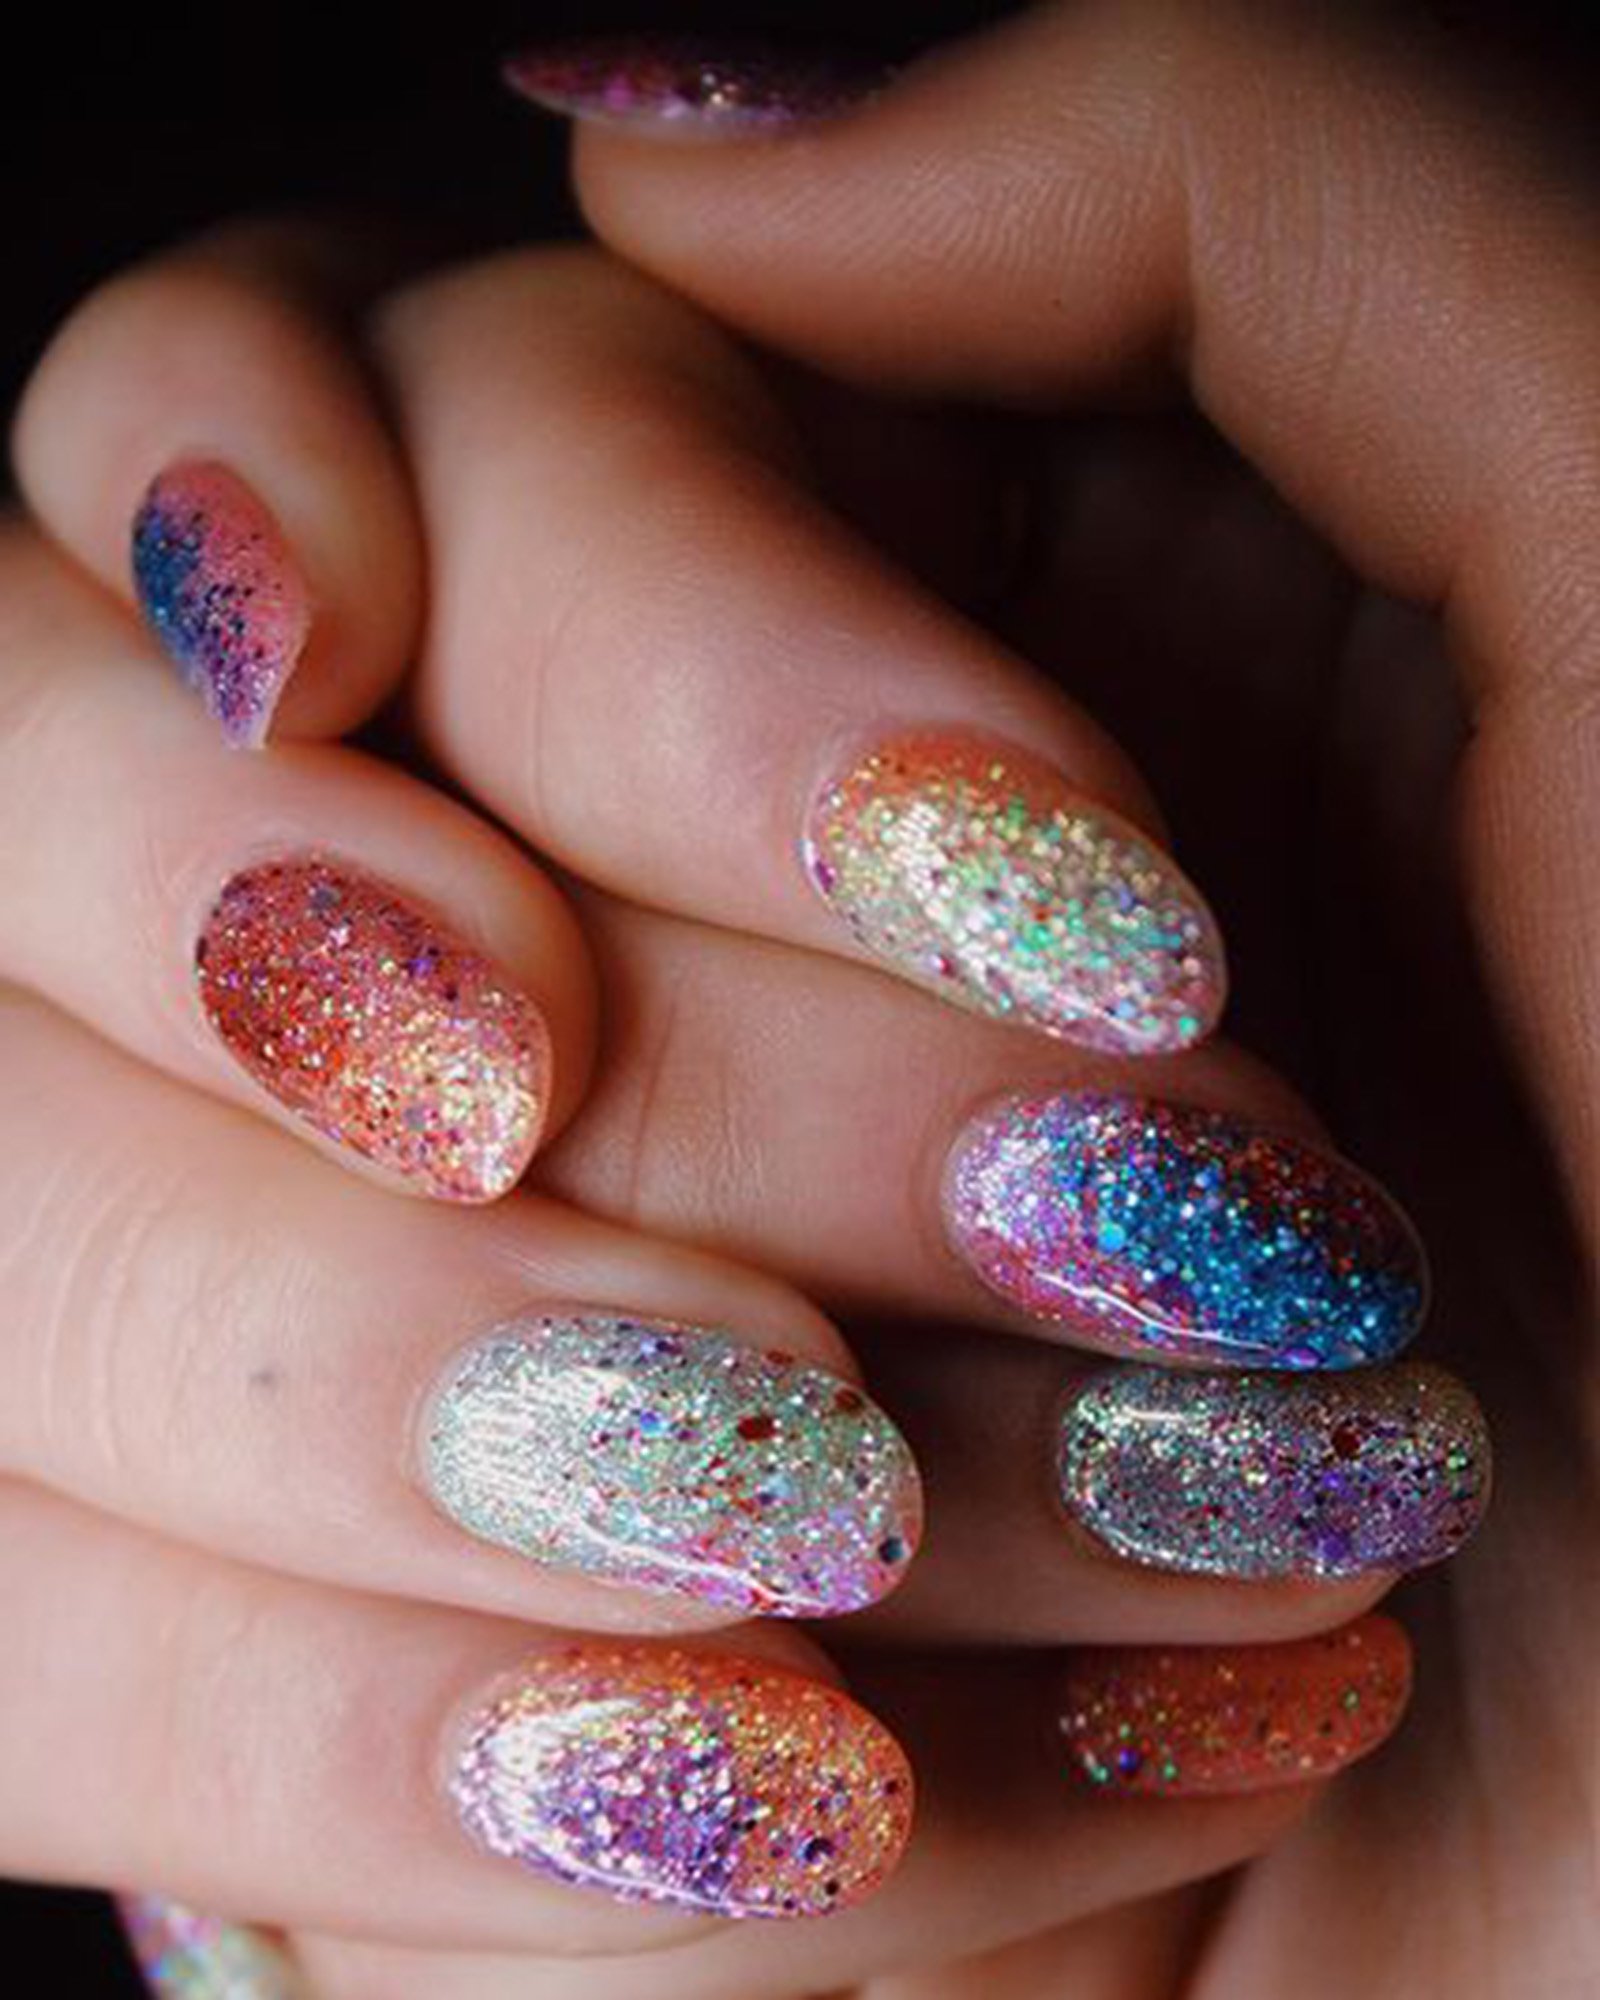 Festival Nails: The Best Festival Nail Art Ideas For Your Glasto Mani